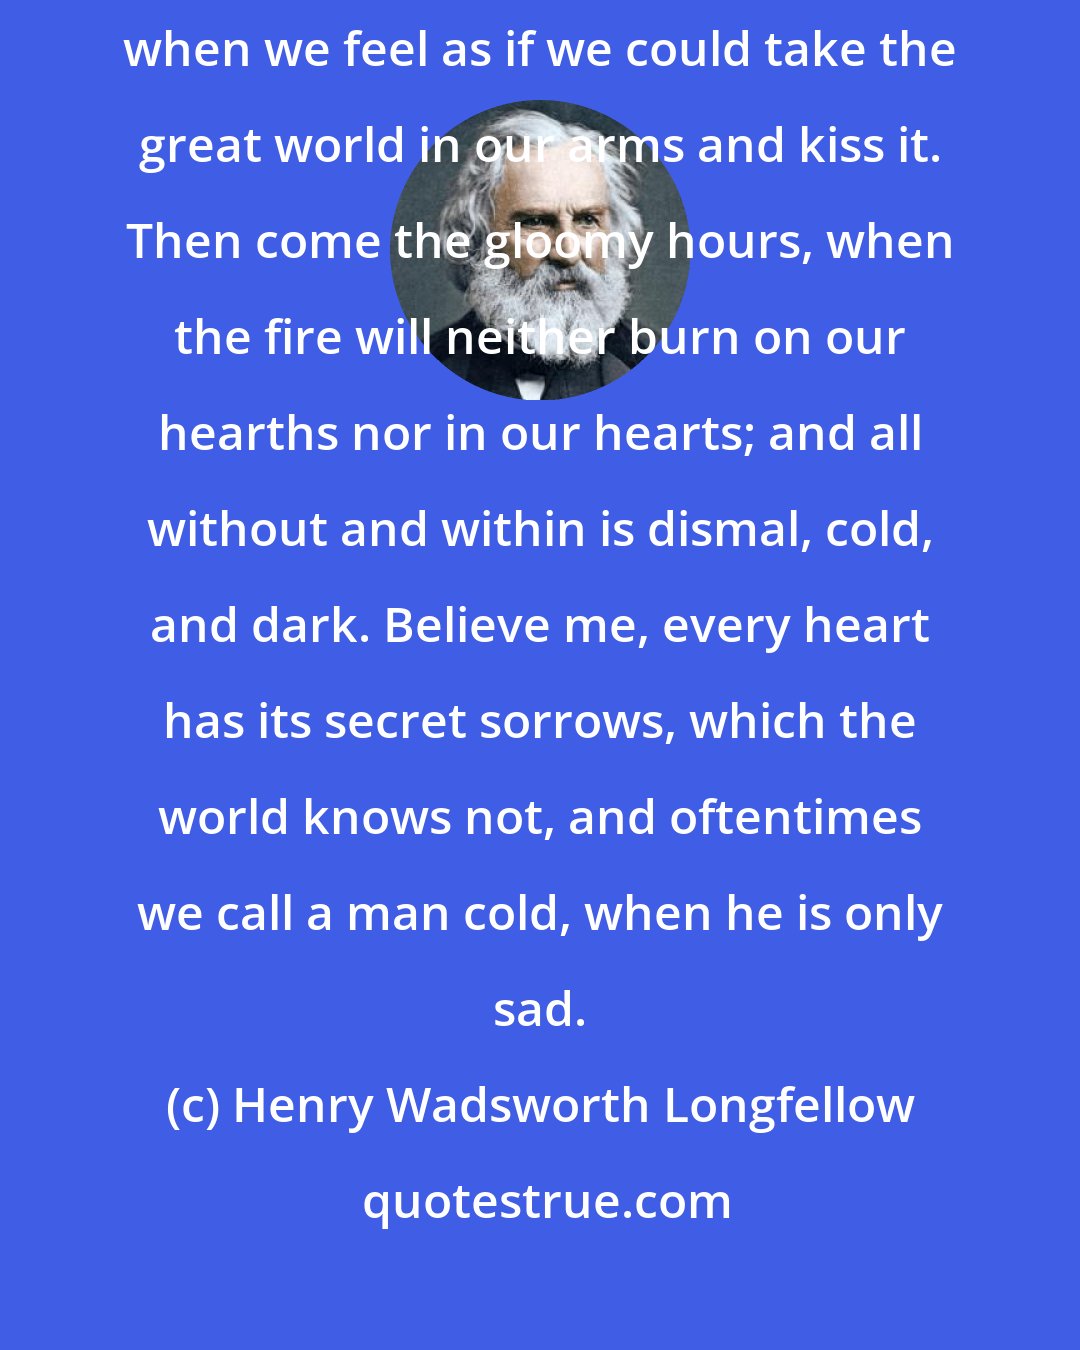 Henry Wadsworth Longfellow: In the lives of the saddest of us, there are bright days like this, when we feel as if we could take the great world in our arms and kiss it. Then come the gloomy hours, when the fire will neither burn on our hearths nor in our hearts; and all without and within is dismal, cold, and dark. Believe me, every heart has its secret sorrows, which the world knows not, and oftentimes we call a man cold, when he is only sad.